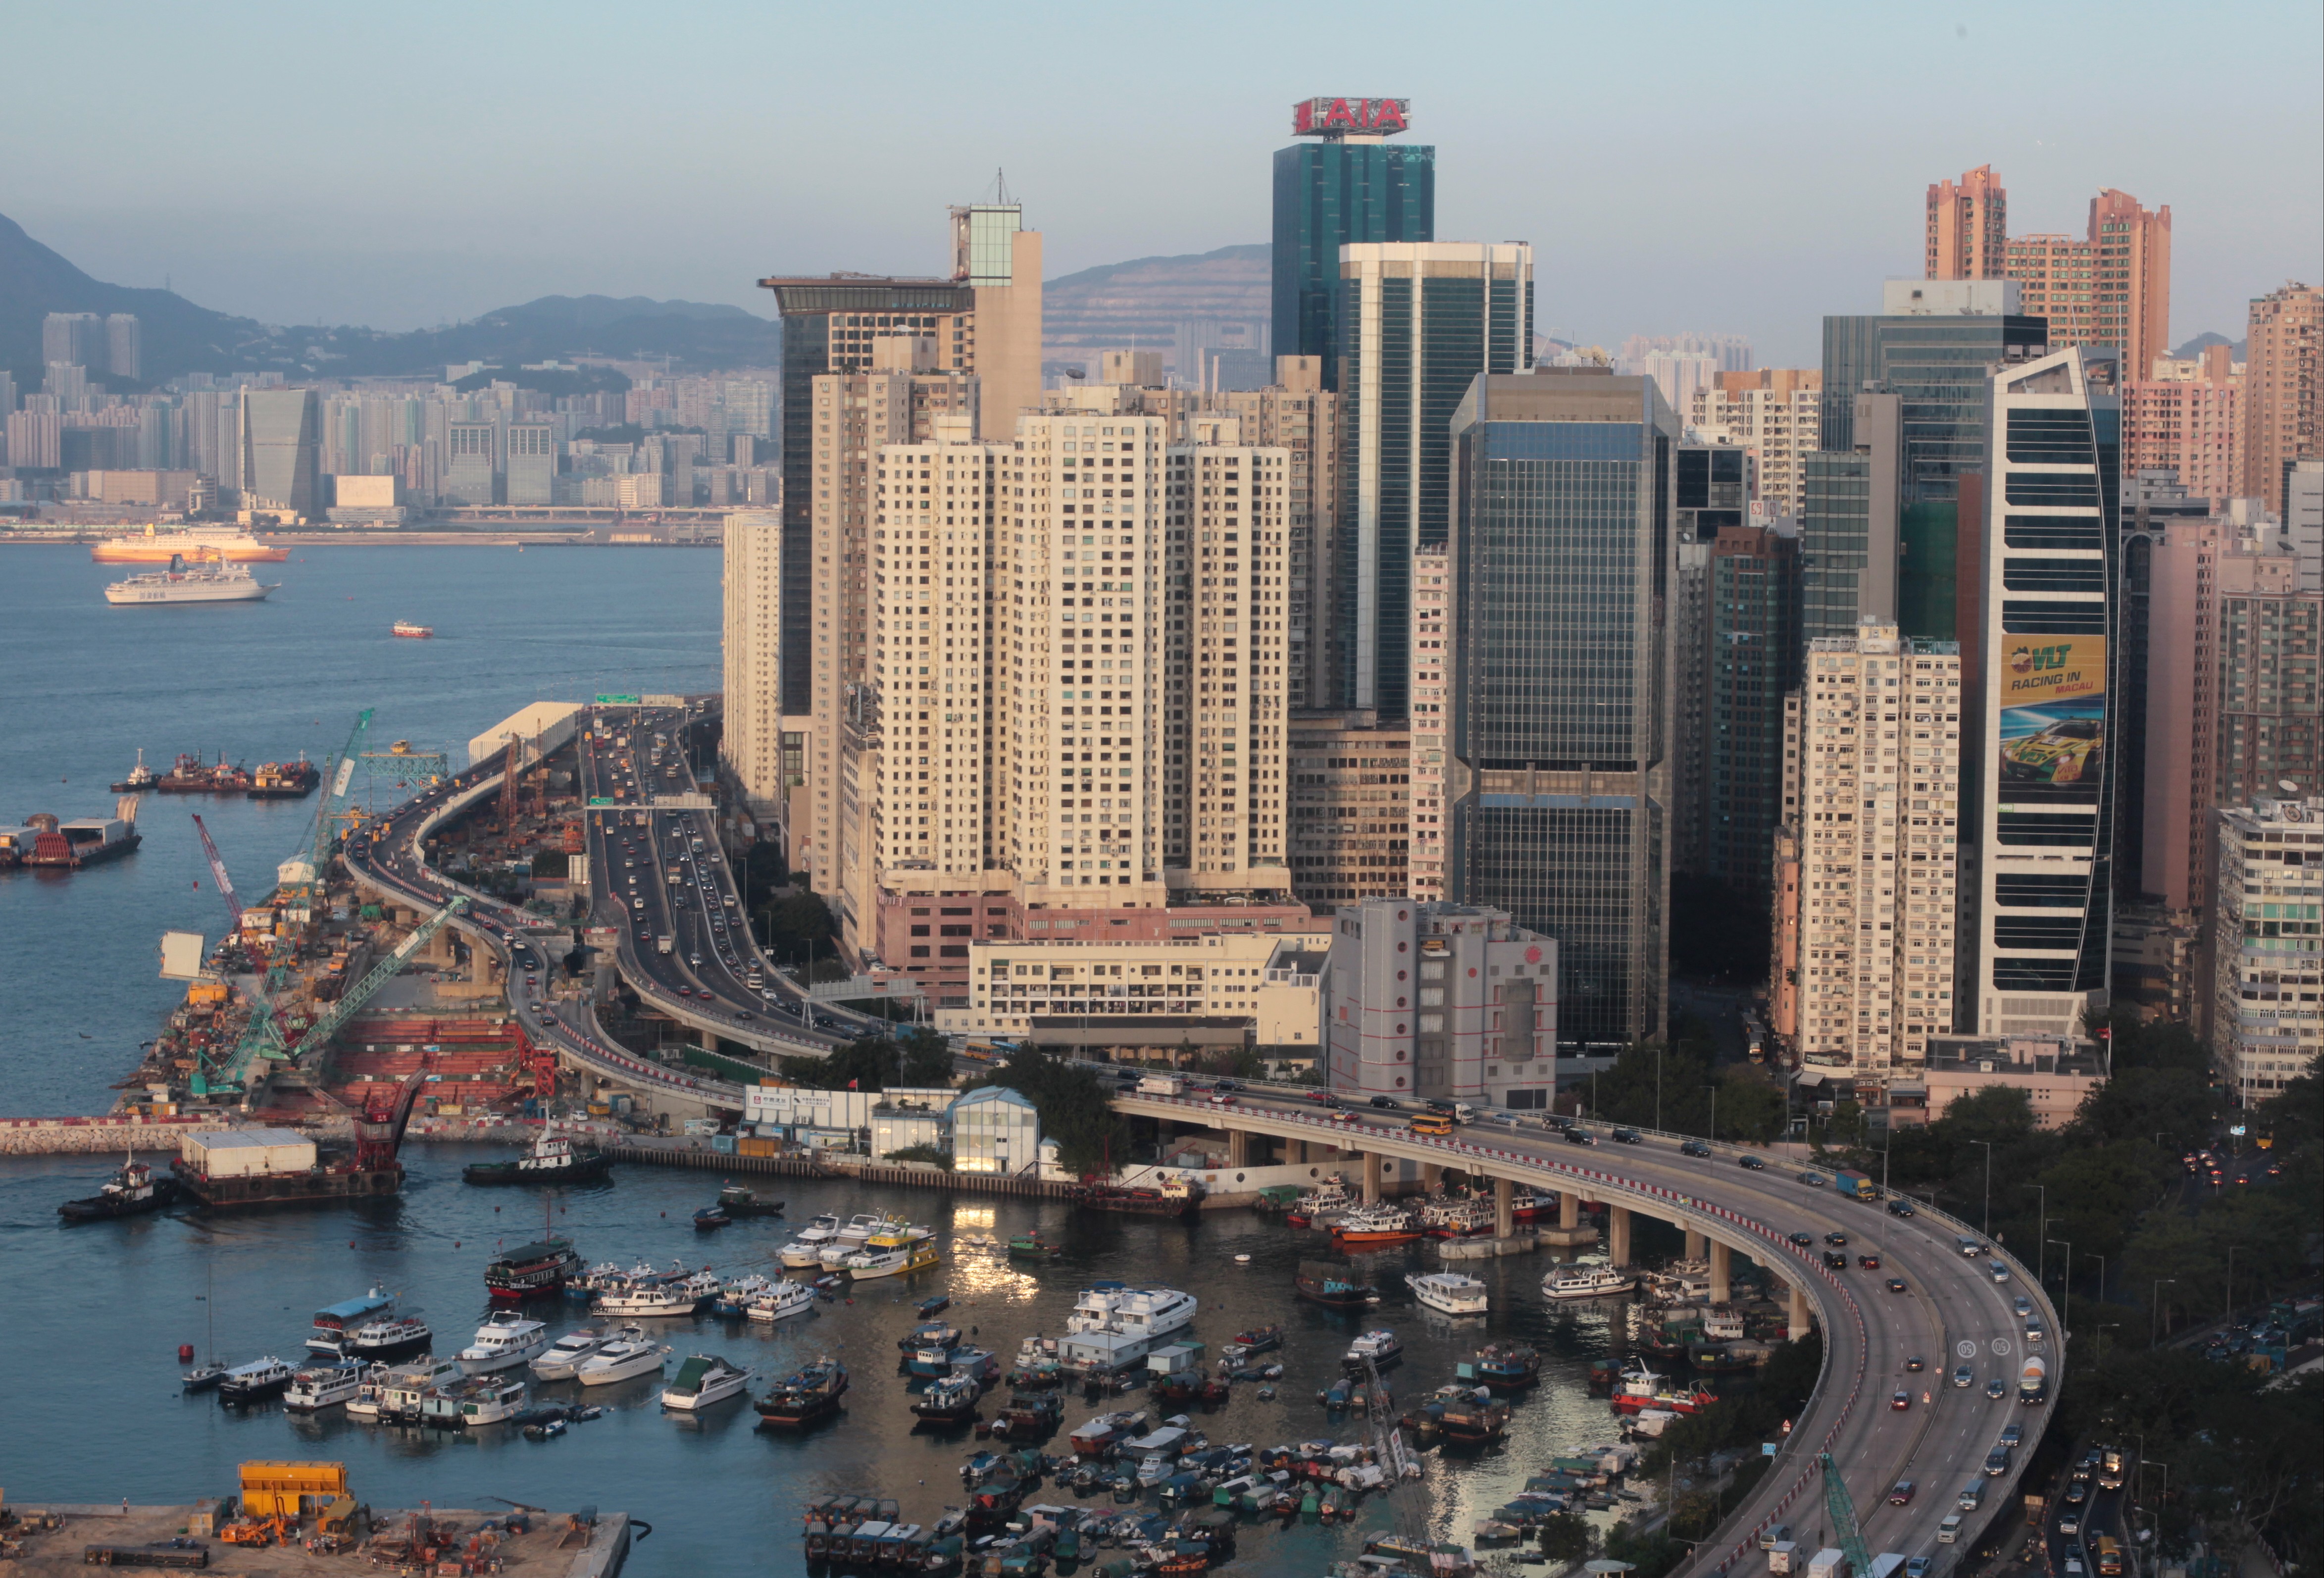 On Hong Kong Island, there is not a single flat in a large estate offered below HK$15,000 per month. Photo: Bruce Yan